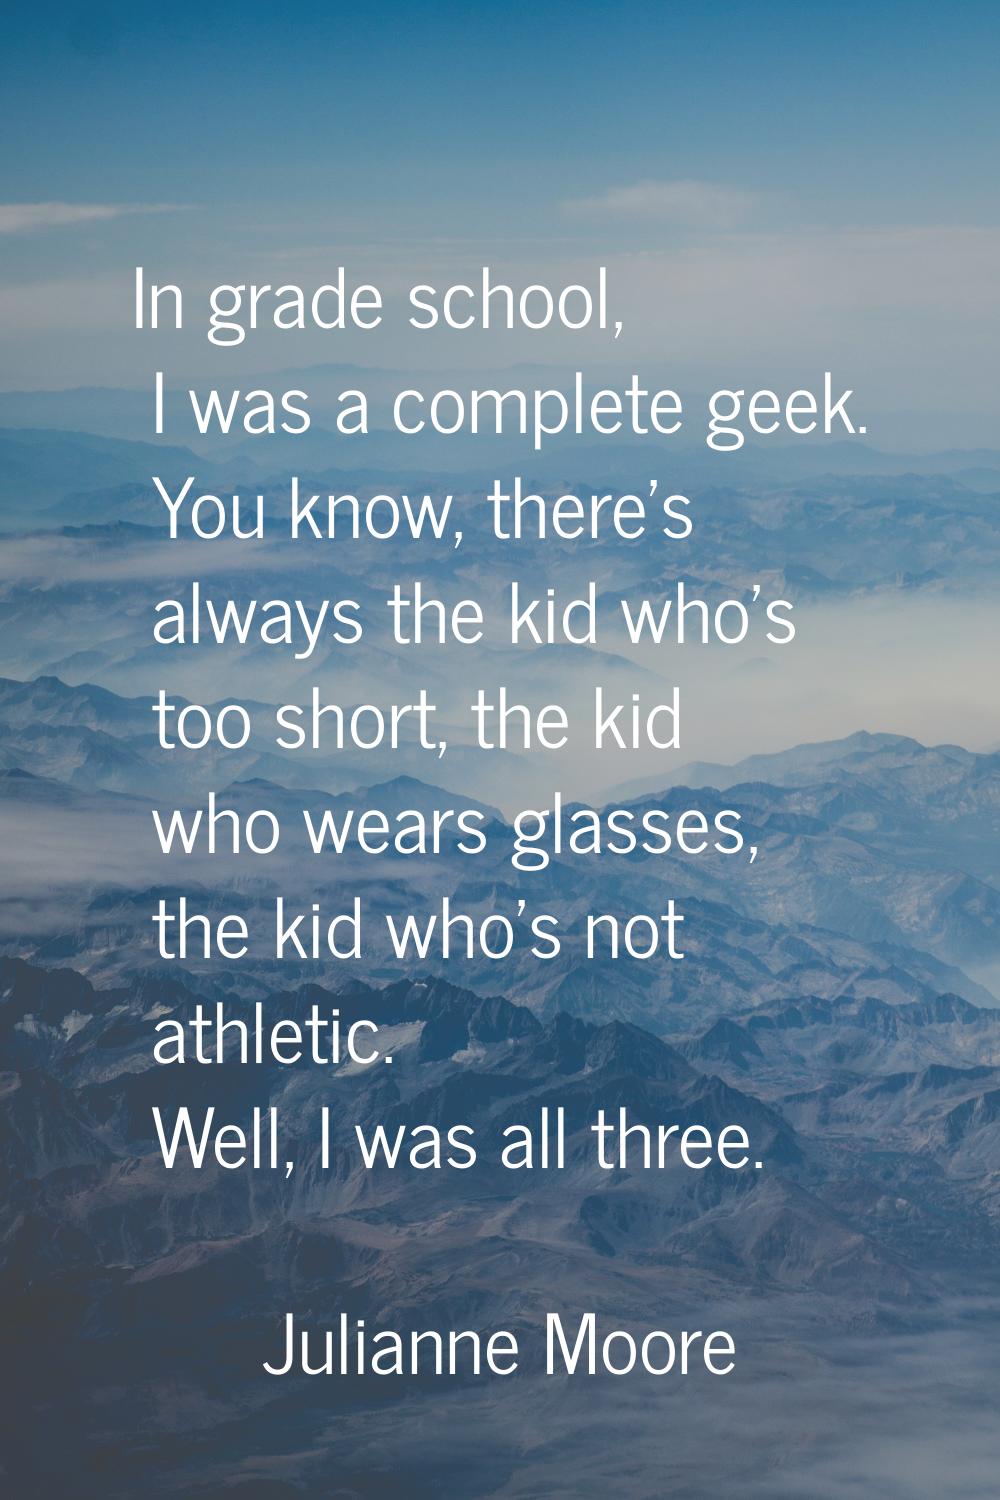 In grade school, I was a complete geek. You know, there's always the kid who's too short, the kid w